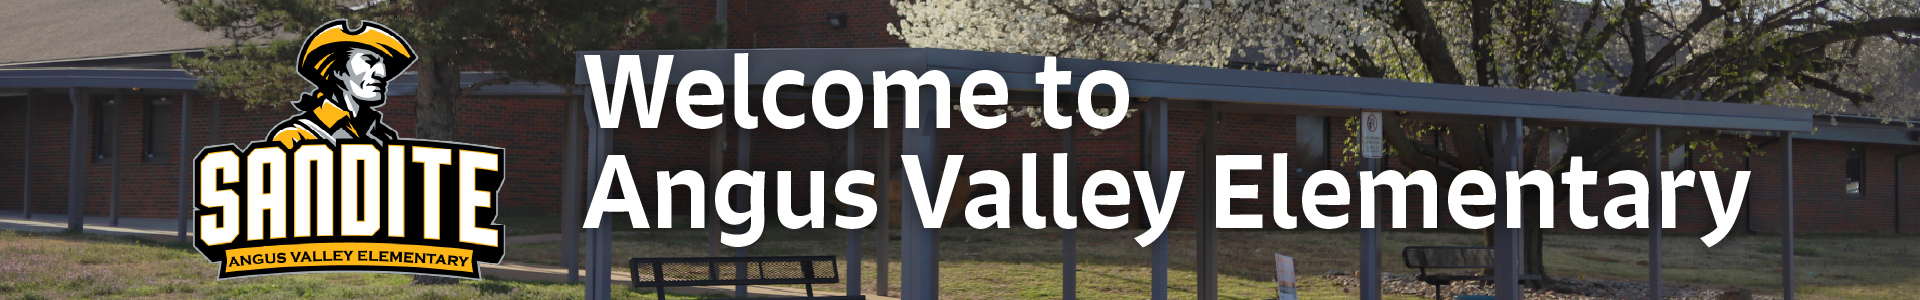 Welcome to Angus Valley Elementary